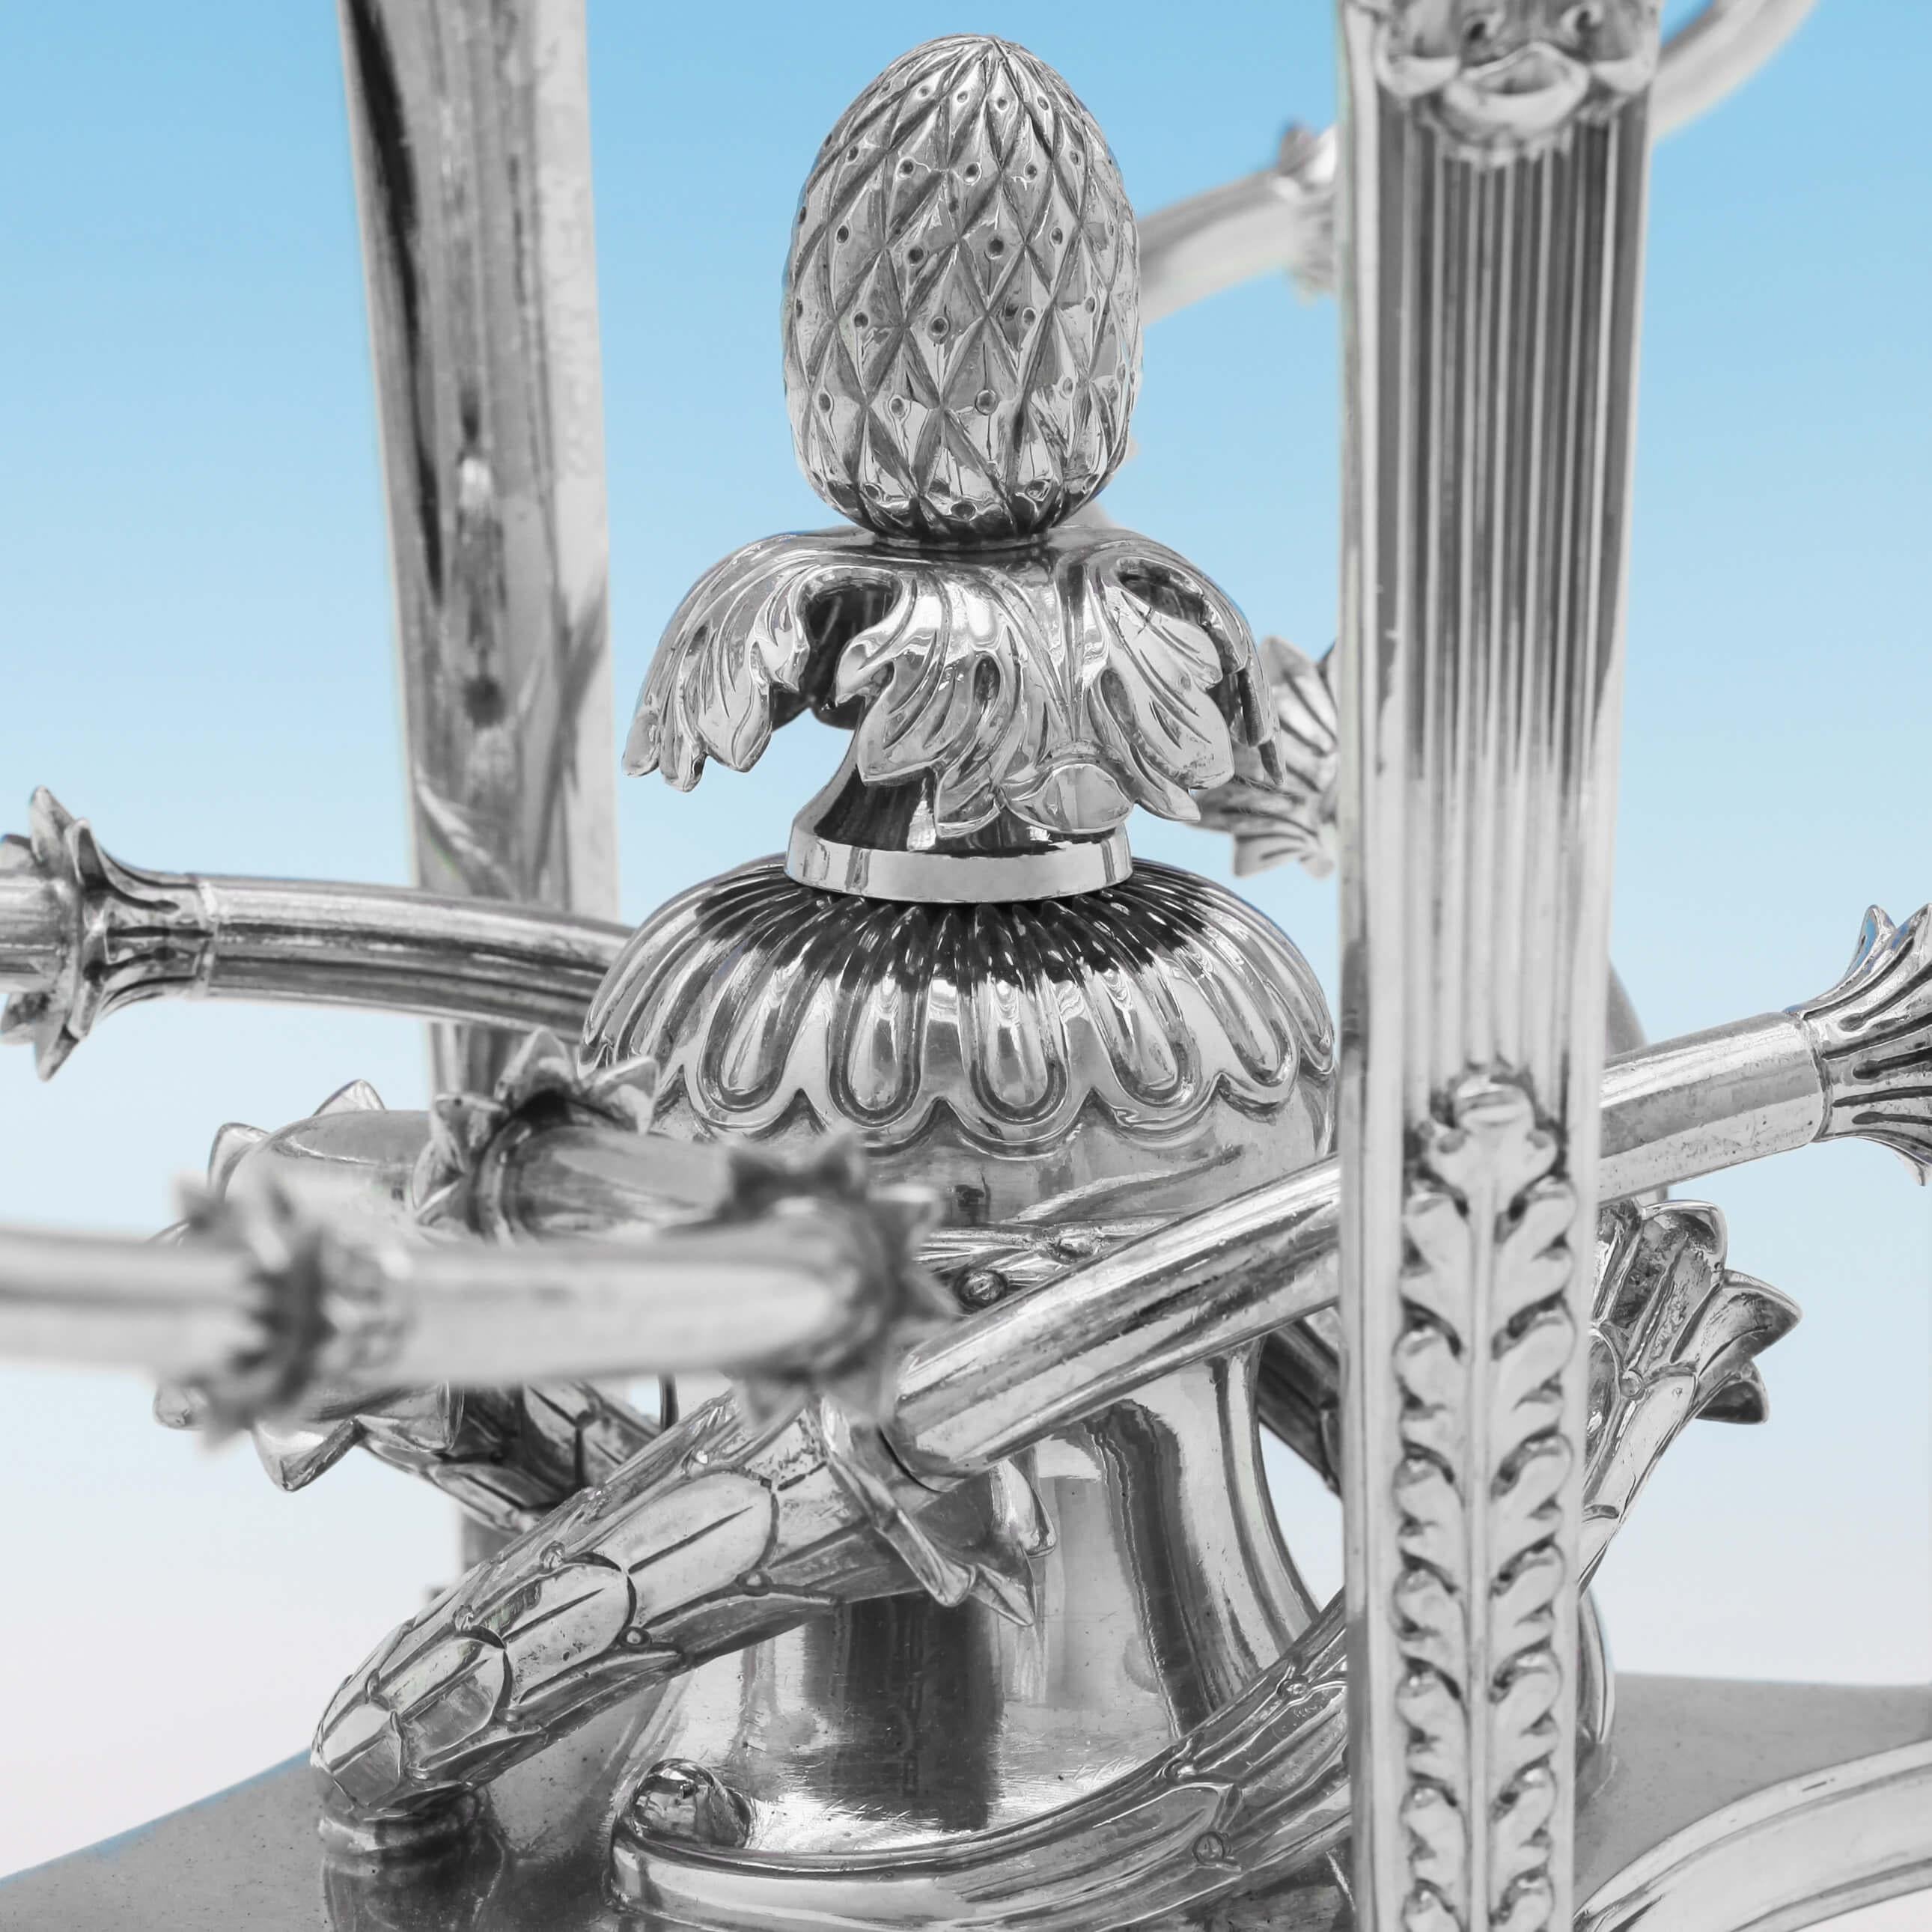 English Sterling Silver Epergne